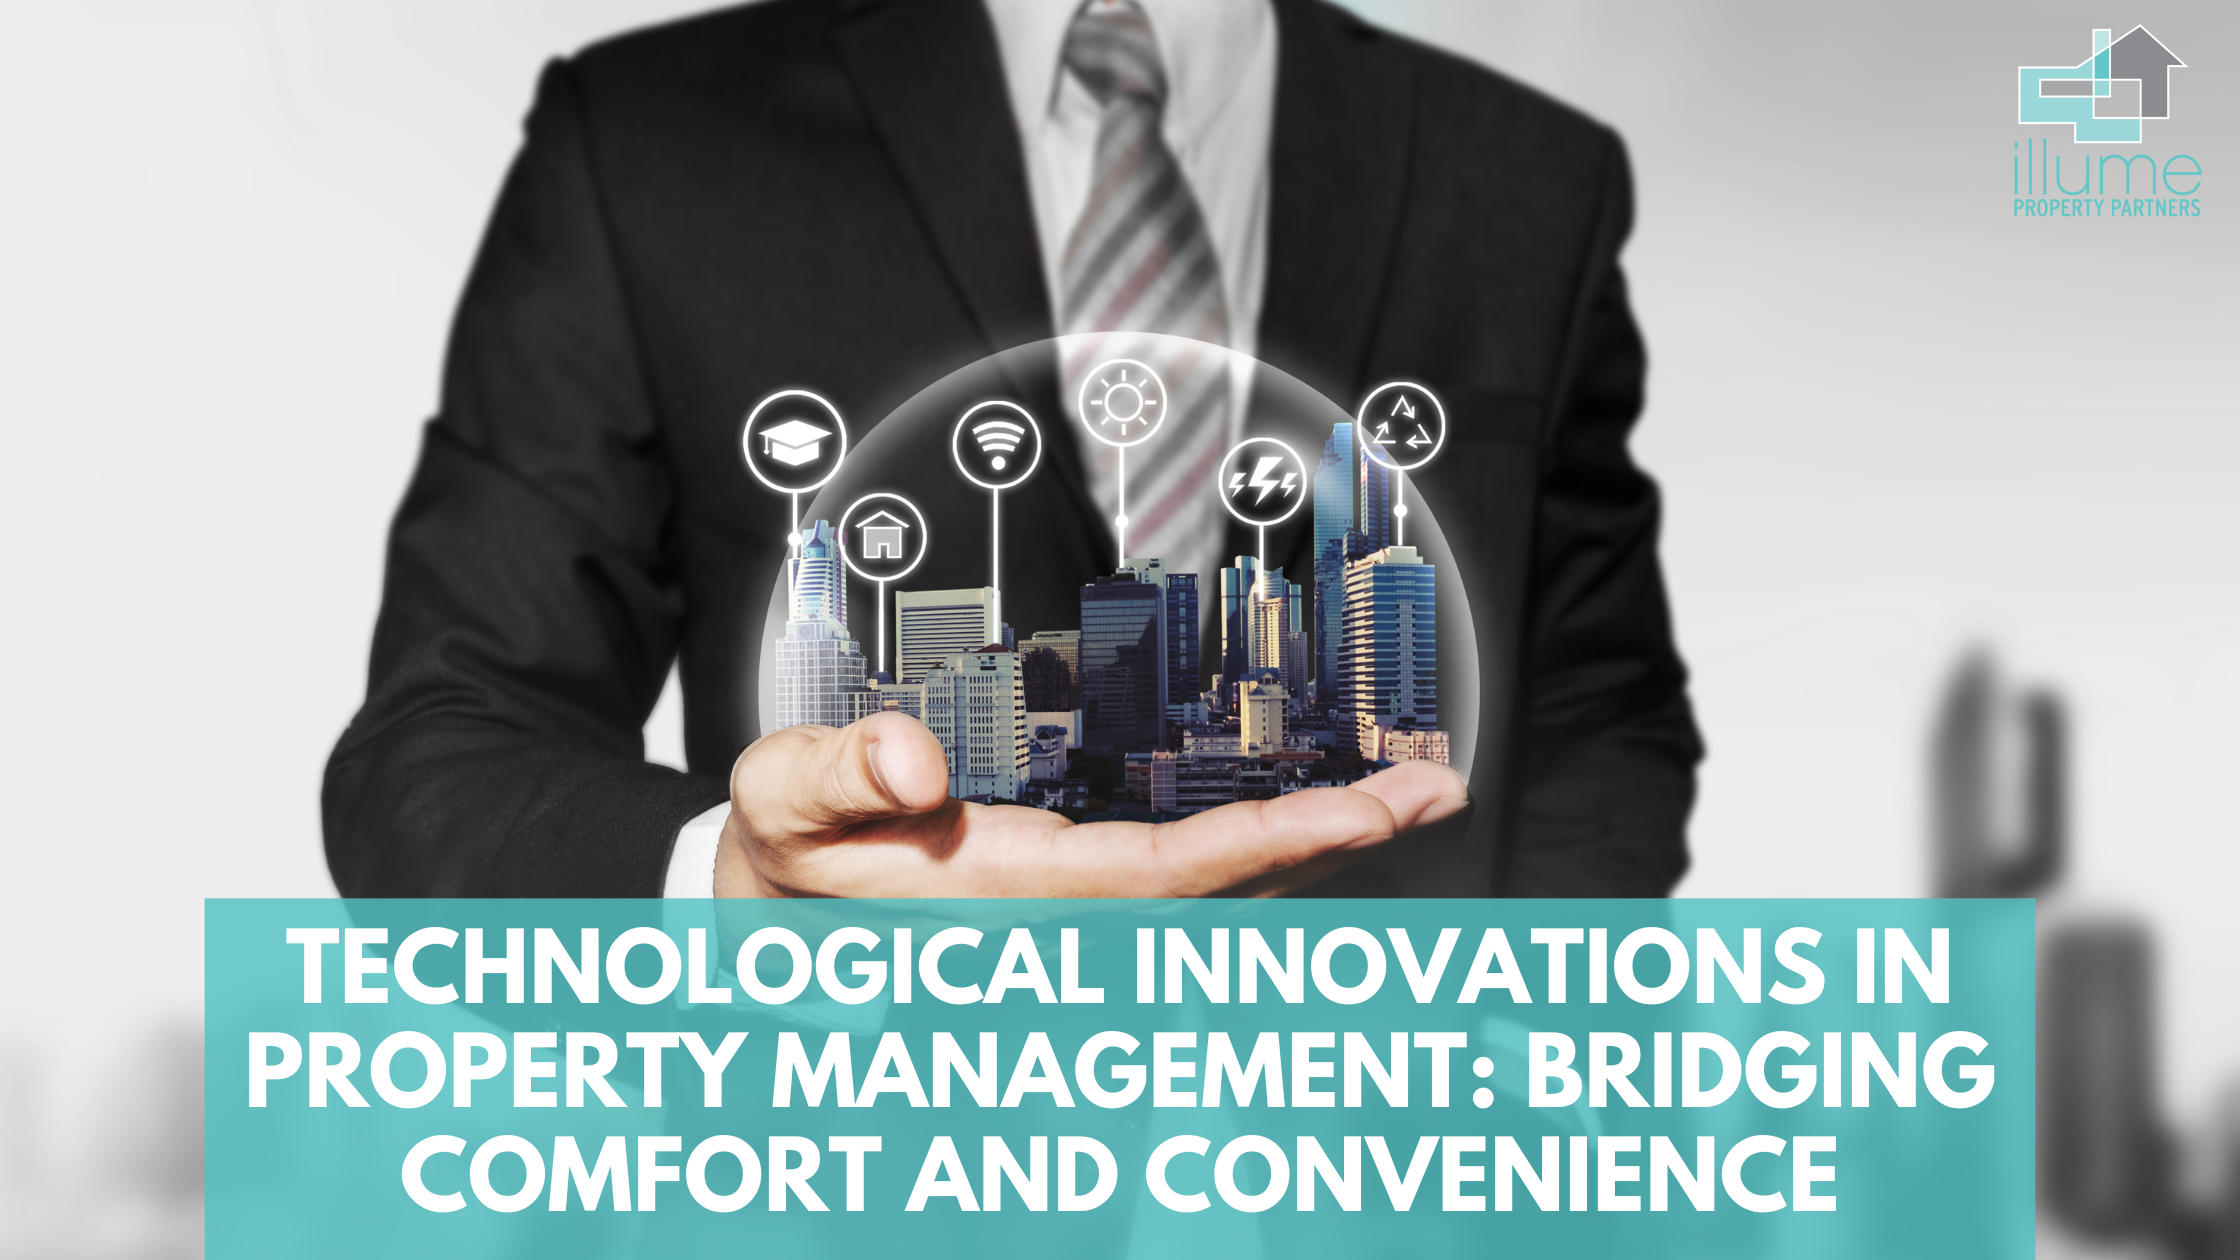 Technological Innovations in Property Management: Bridging Comfort and Convenience